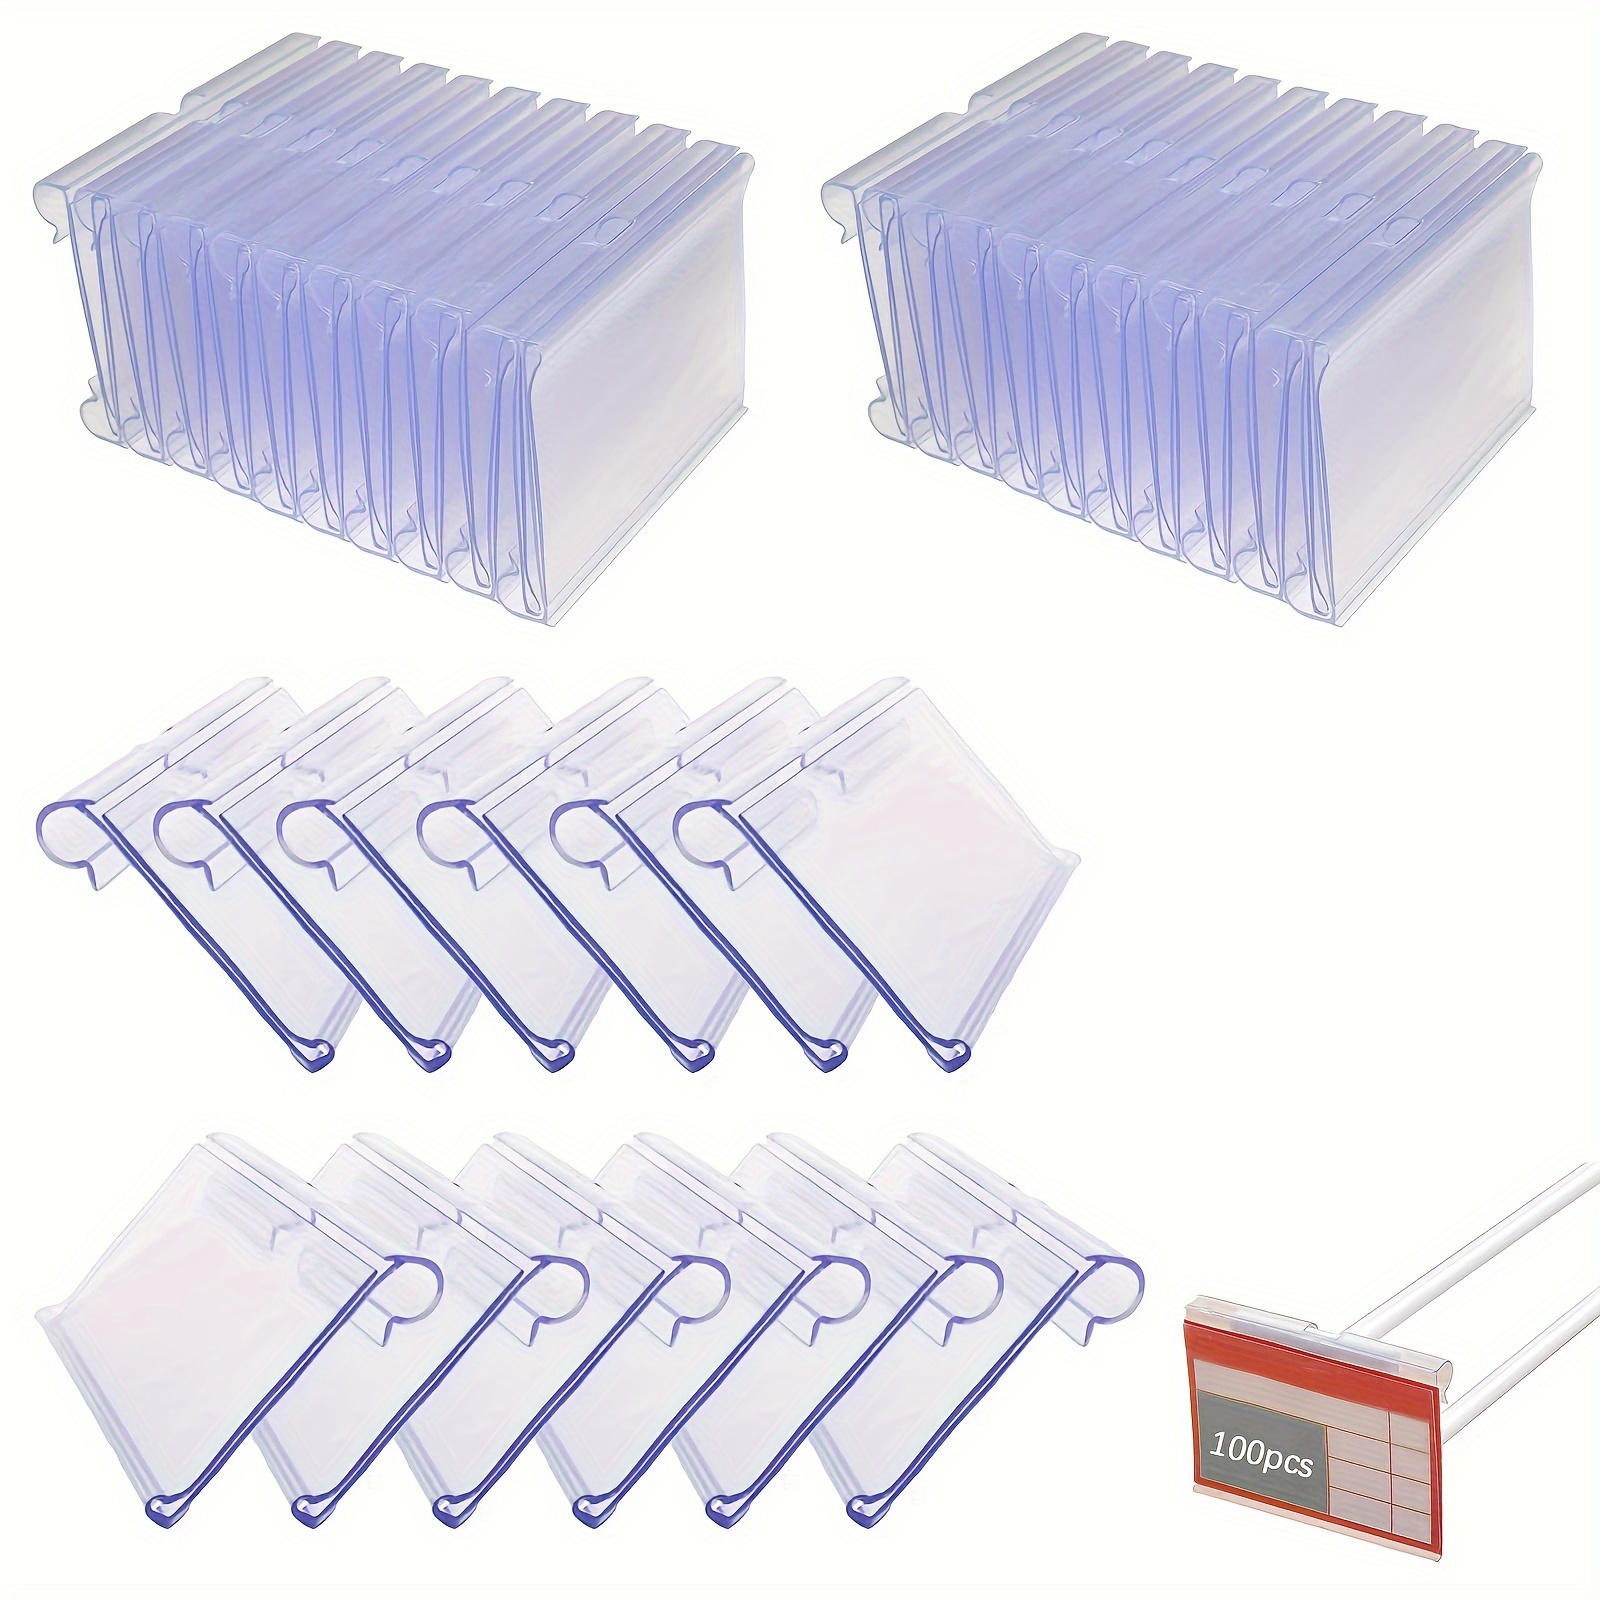 

100pcs Label Holder, Pvc Price Label Holder Clear Plastic Reusable, Suitable For Large Shopping Malls, Supermarkets, Small Shops